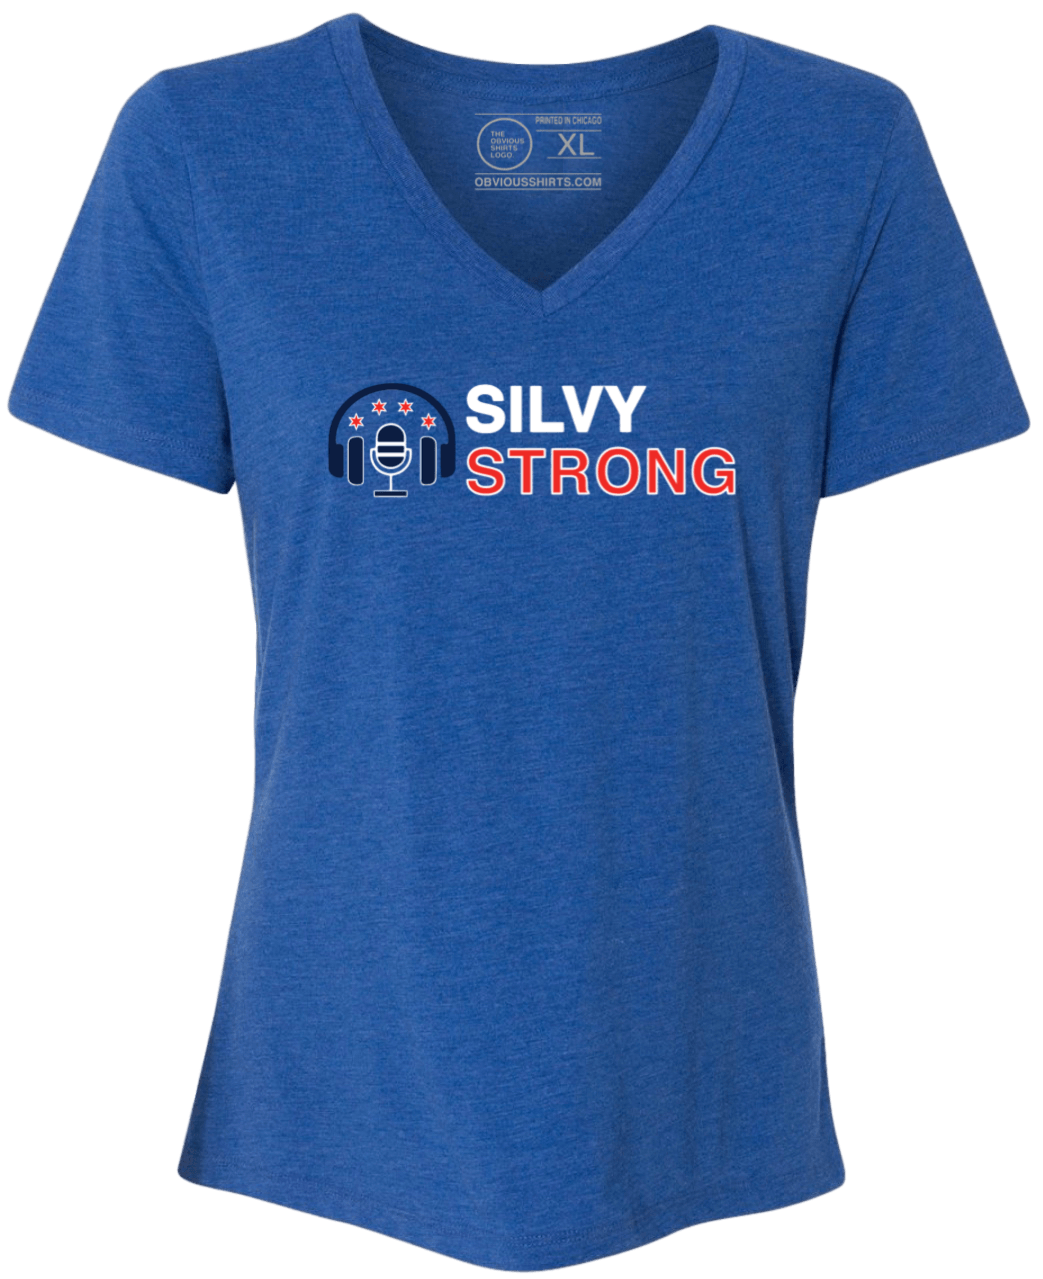 SILVY STRONG (WOMEN'S V-NECK) - OBVIOUS SHIRTS.